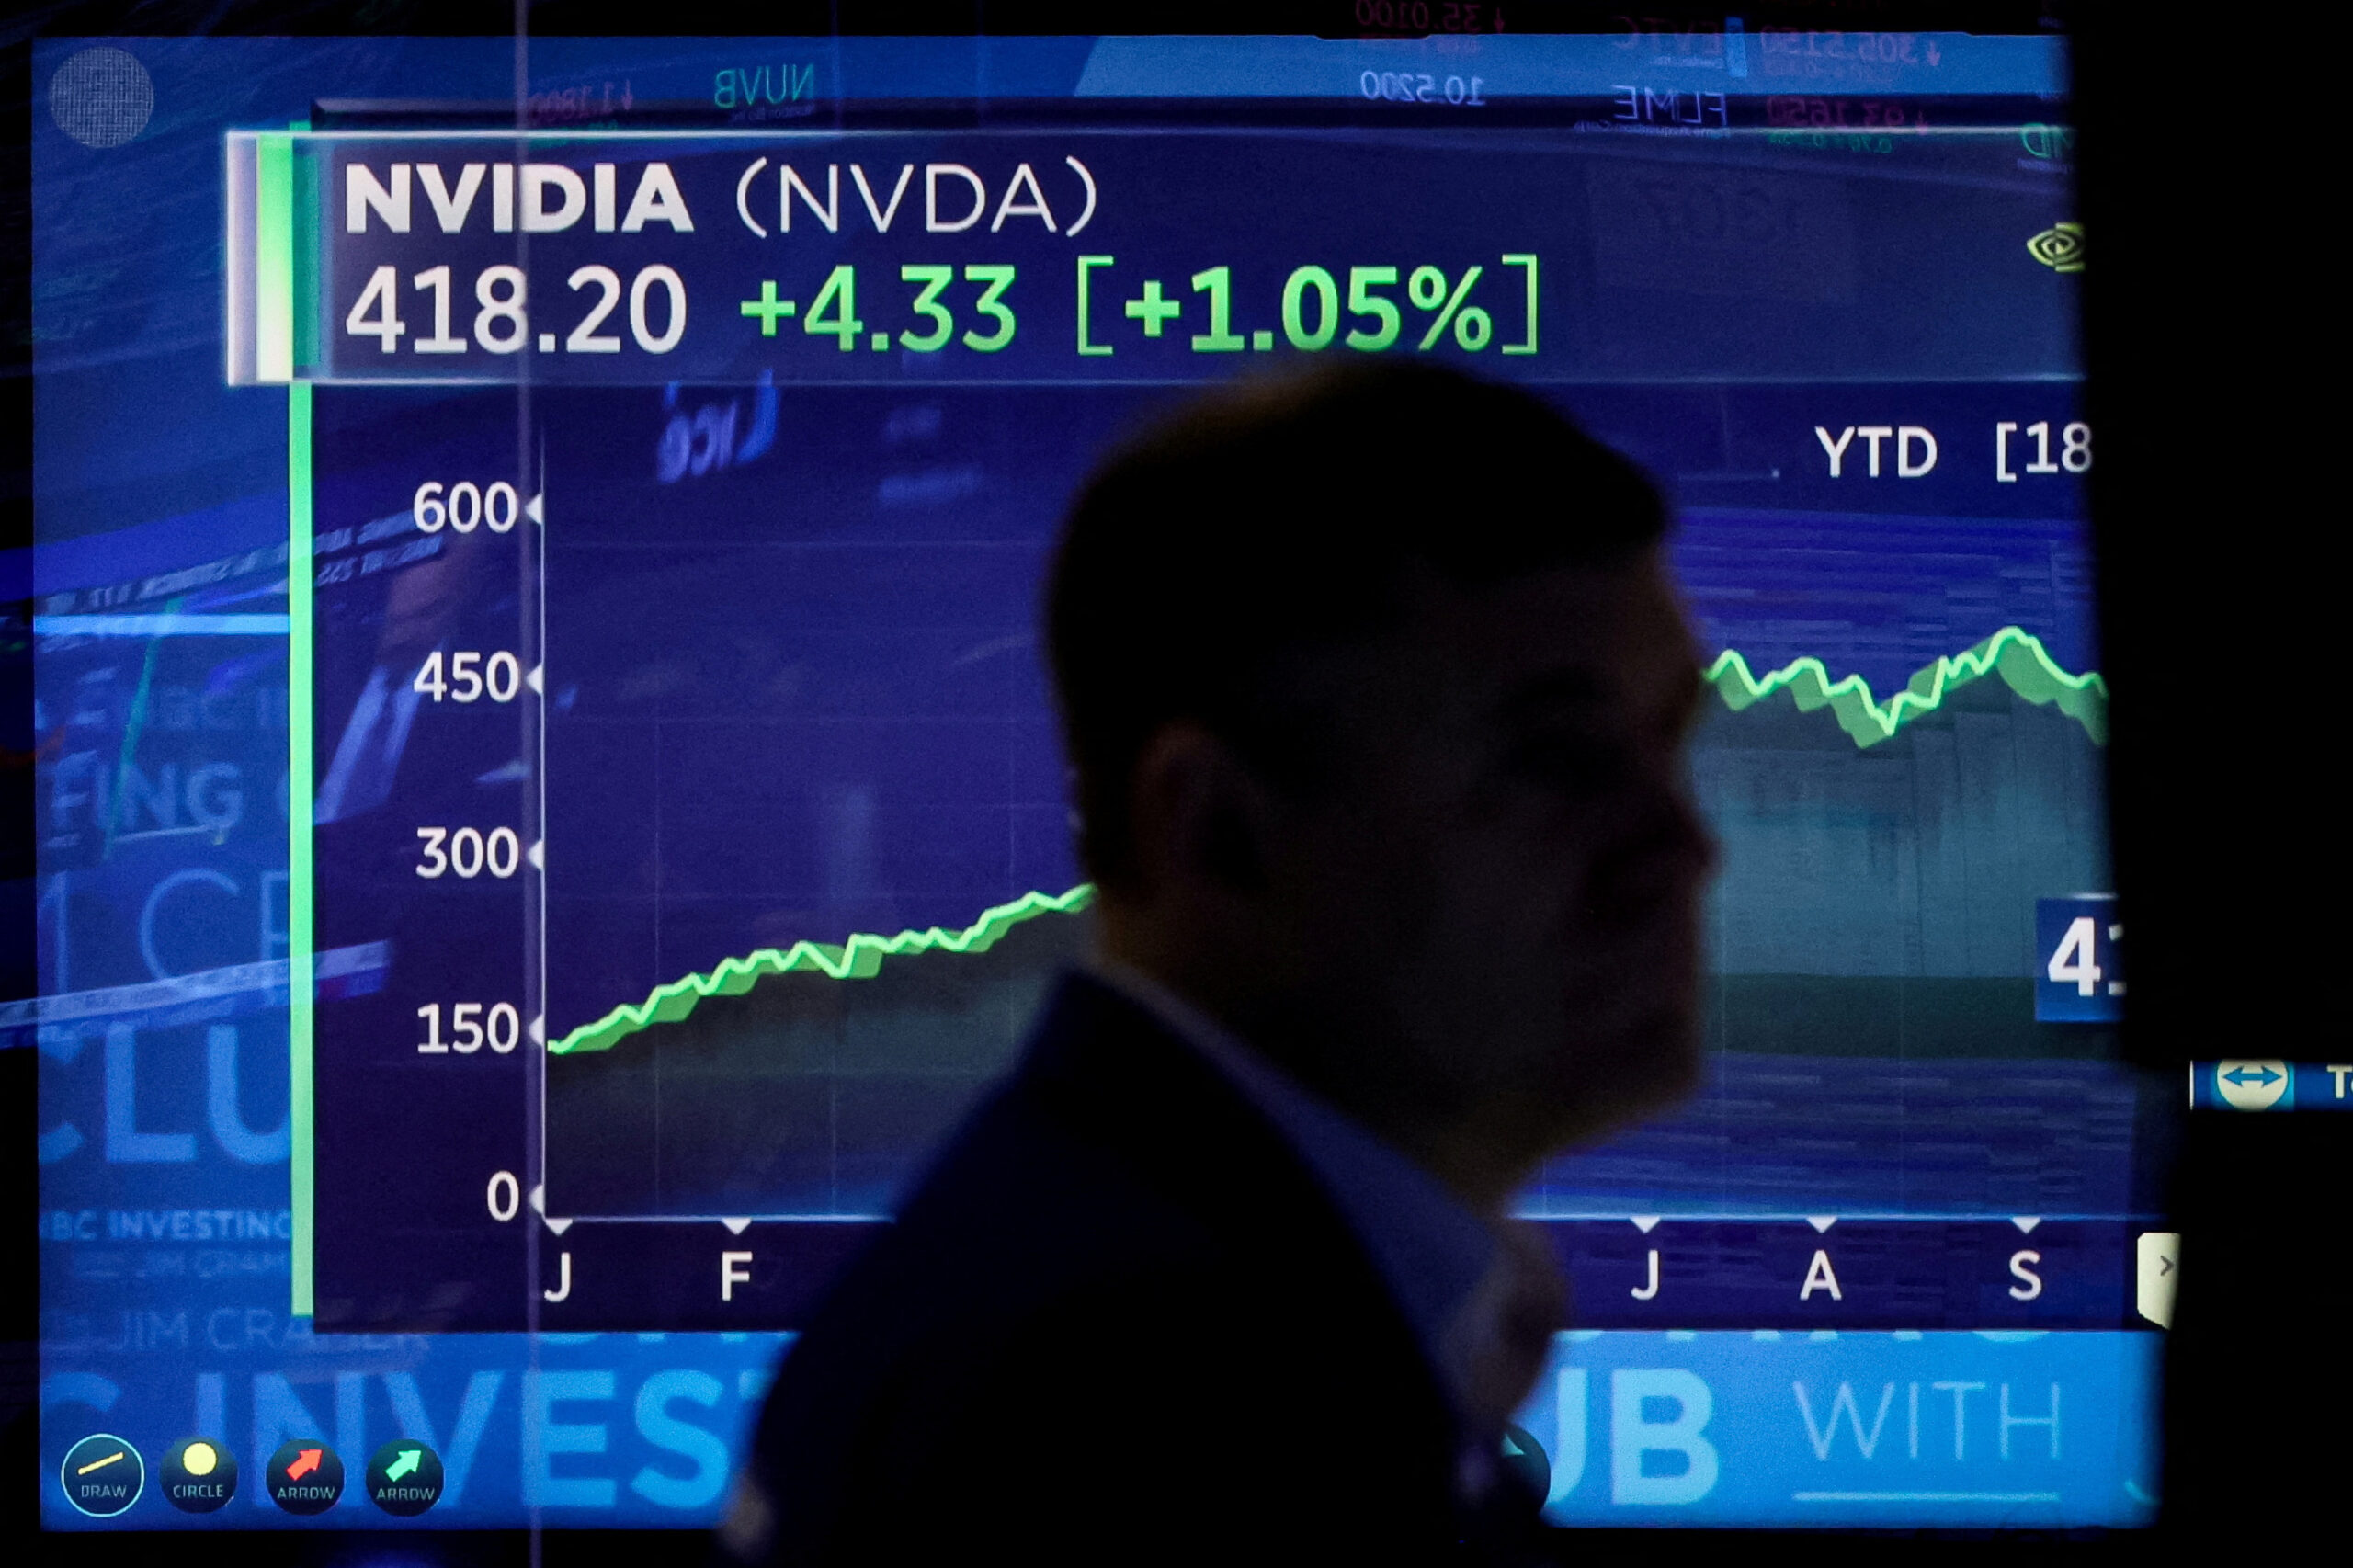 Nvidia replaces Alphabet as 3rd most valuable company